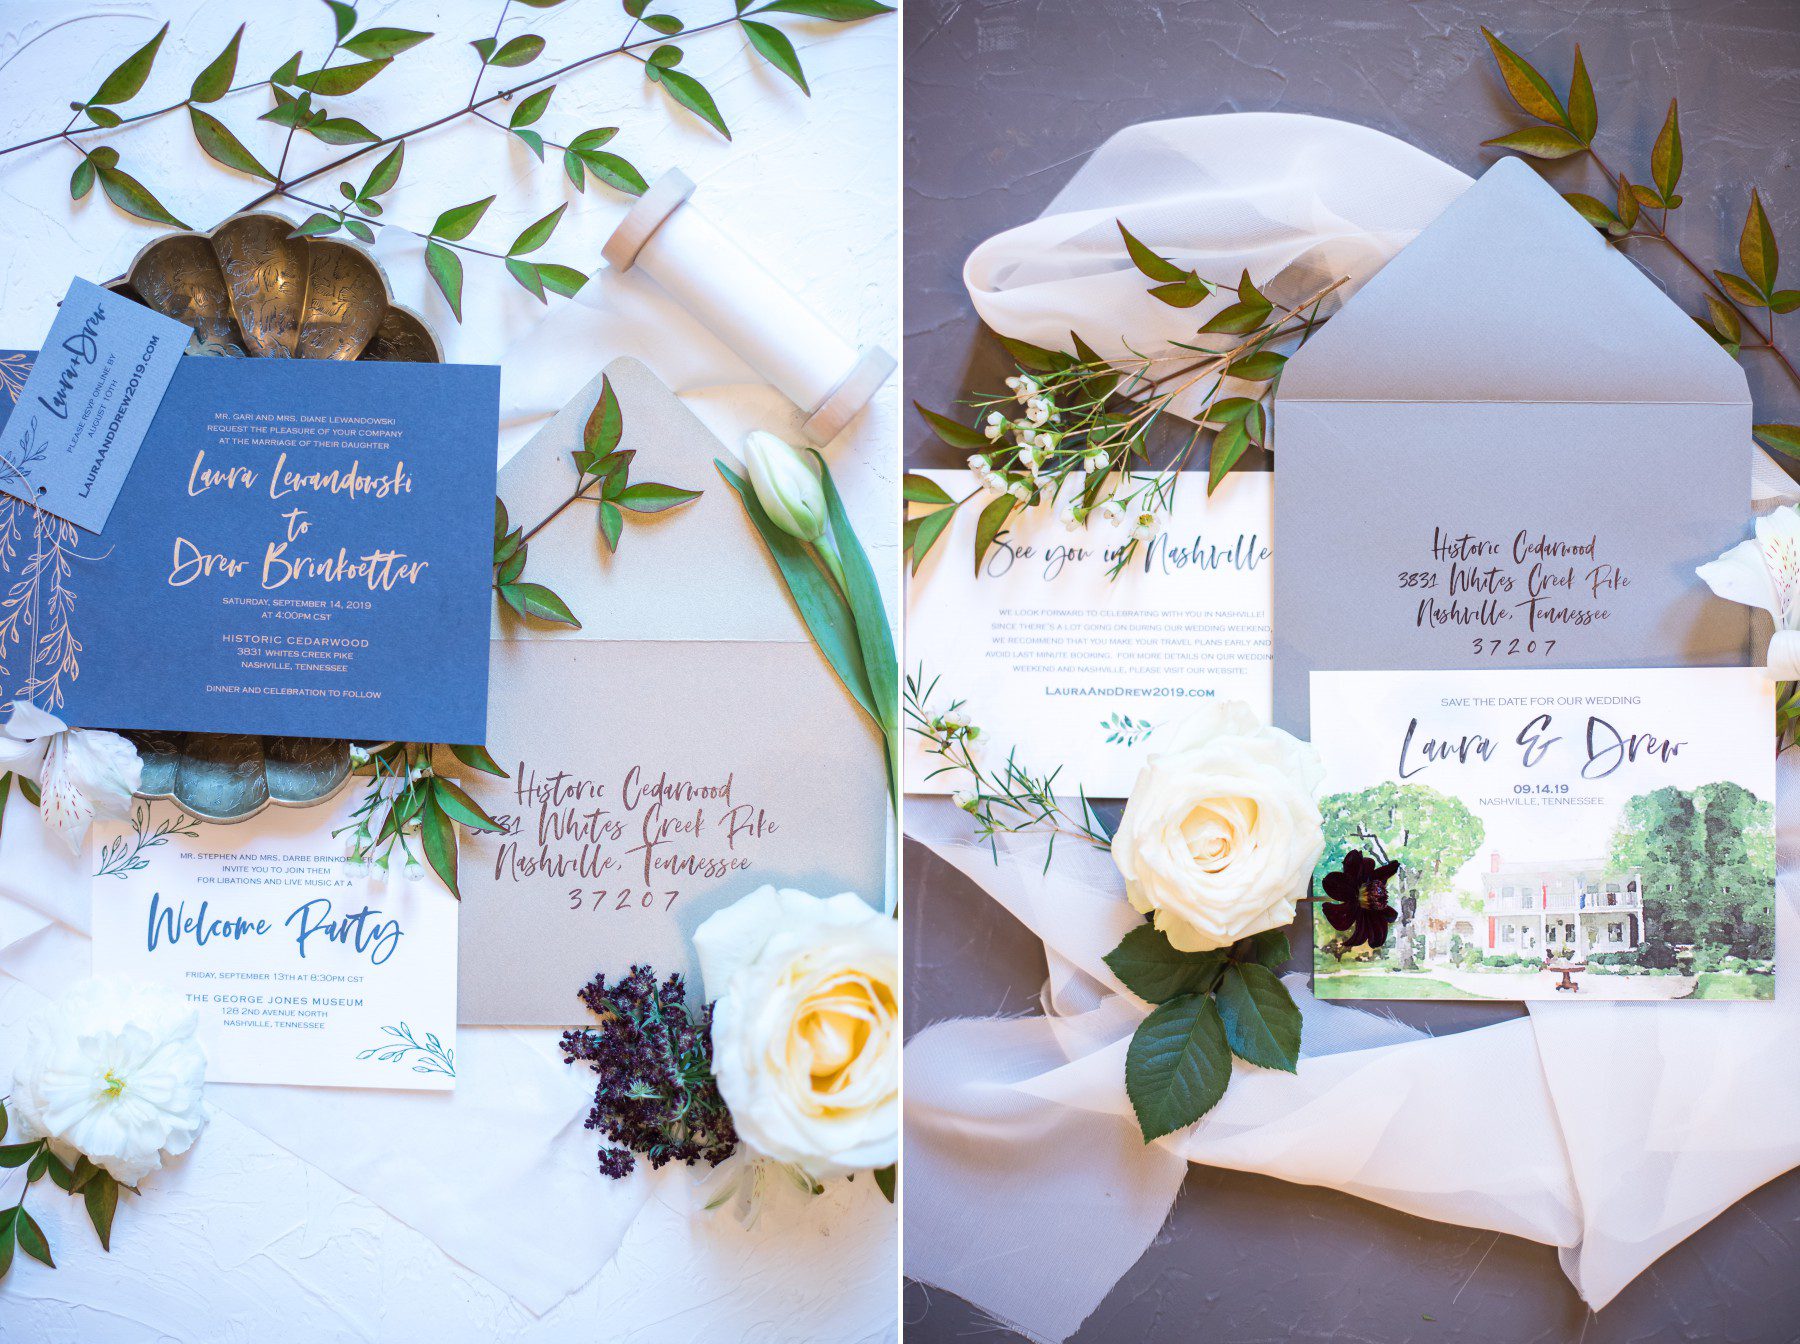 beautiful invitations and save the dates before wedding at cedarwood nashville TN, photos by Krista Lee